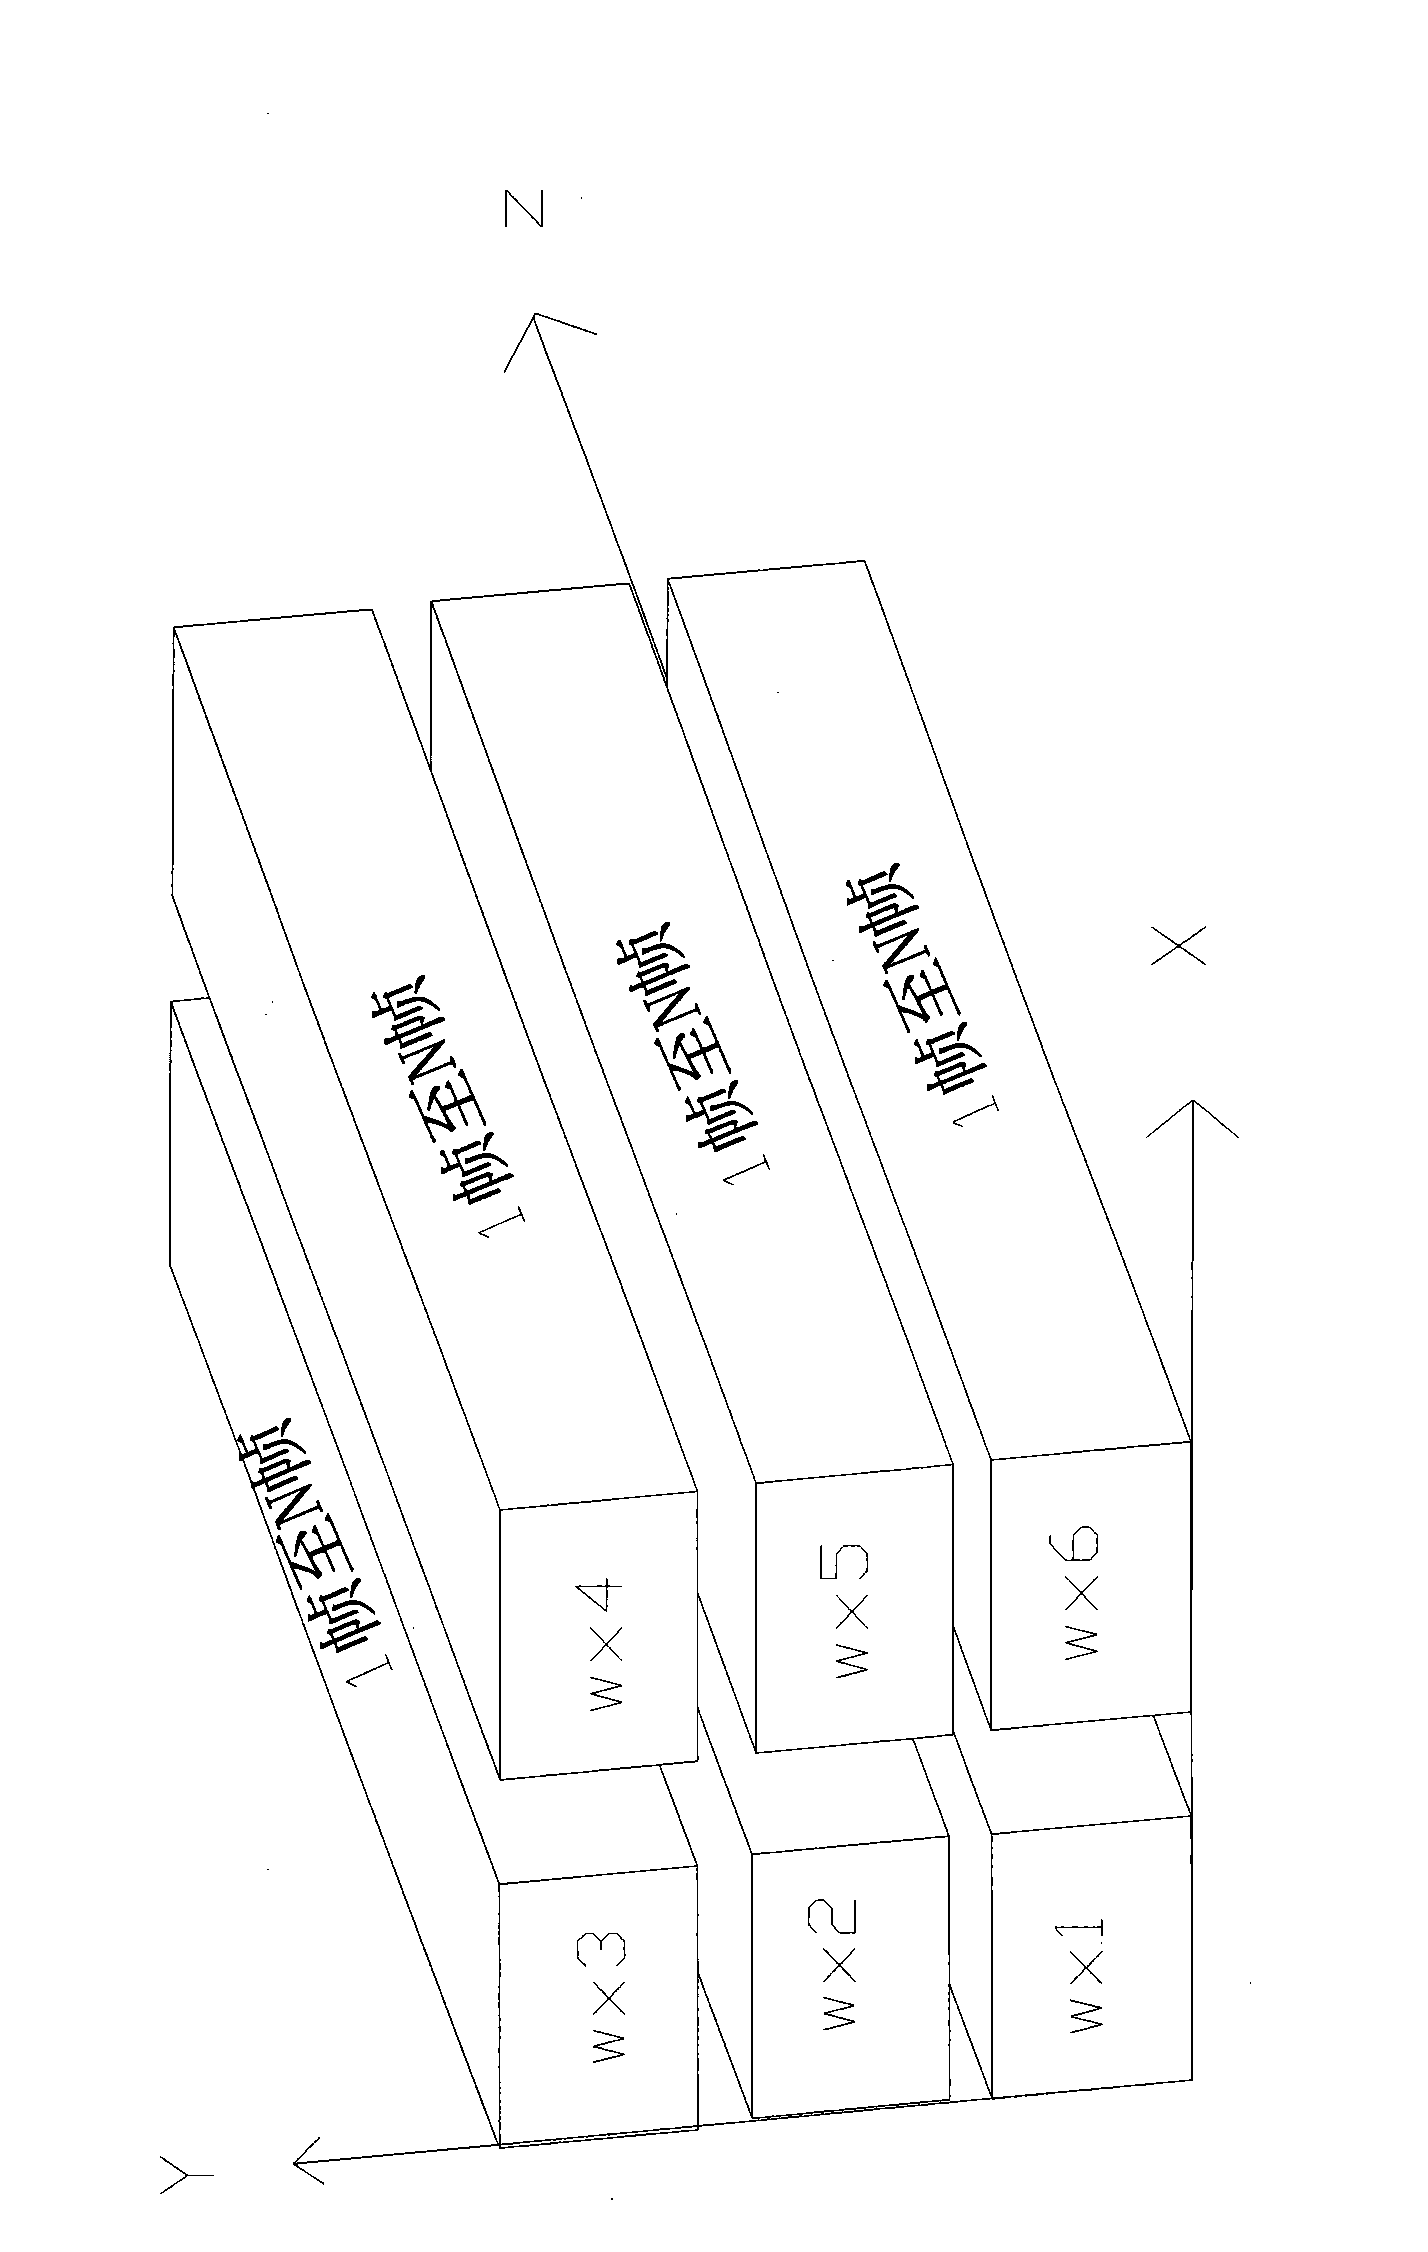 Image sequence encrypting and decrypting method